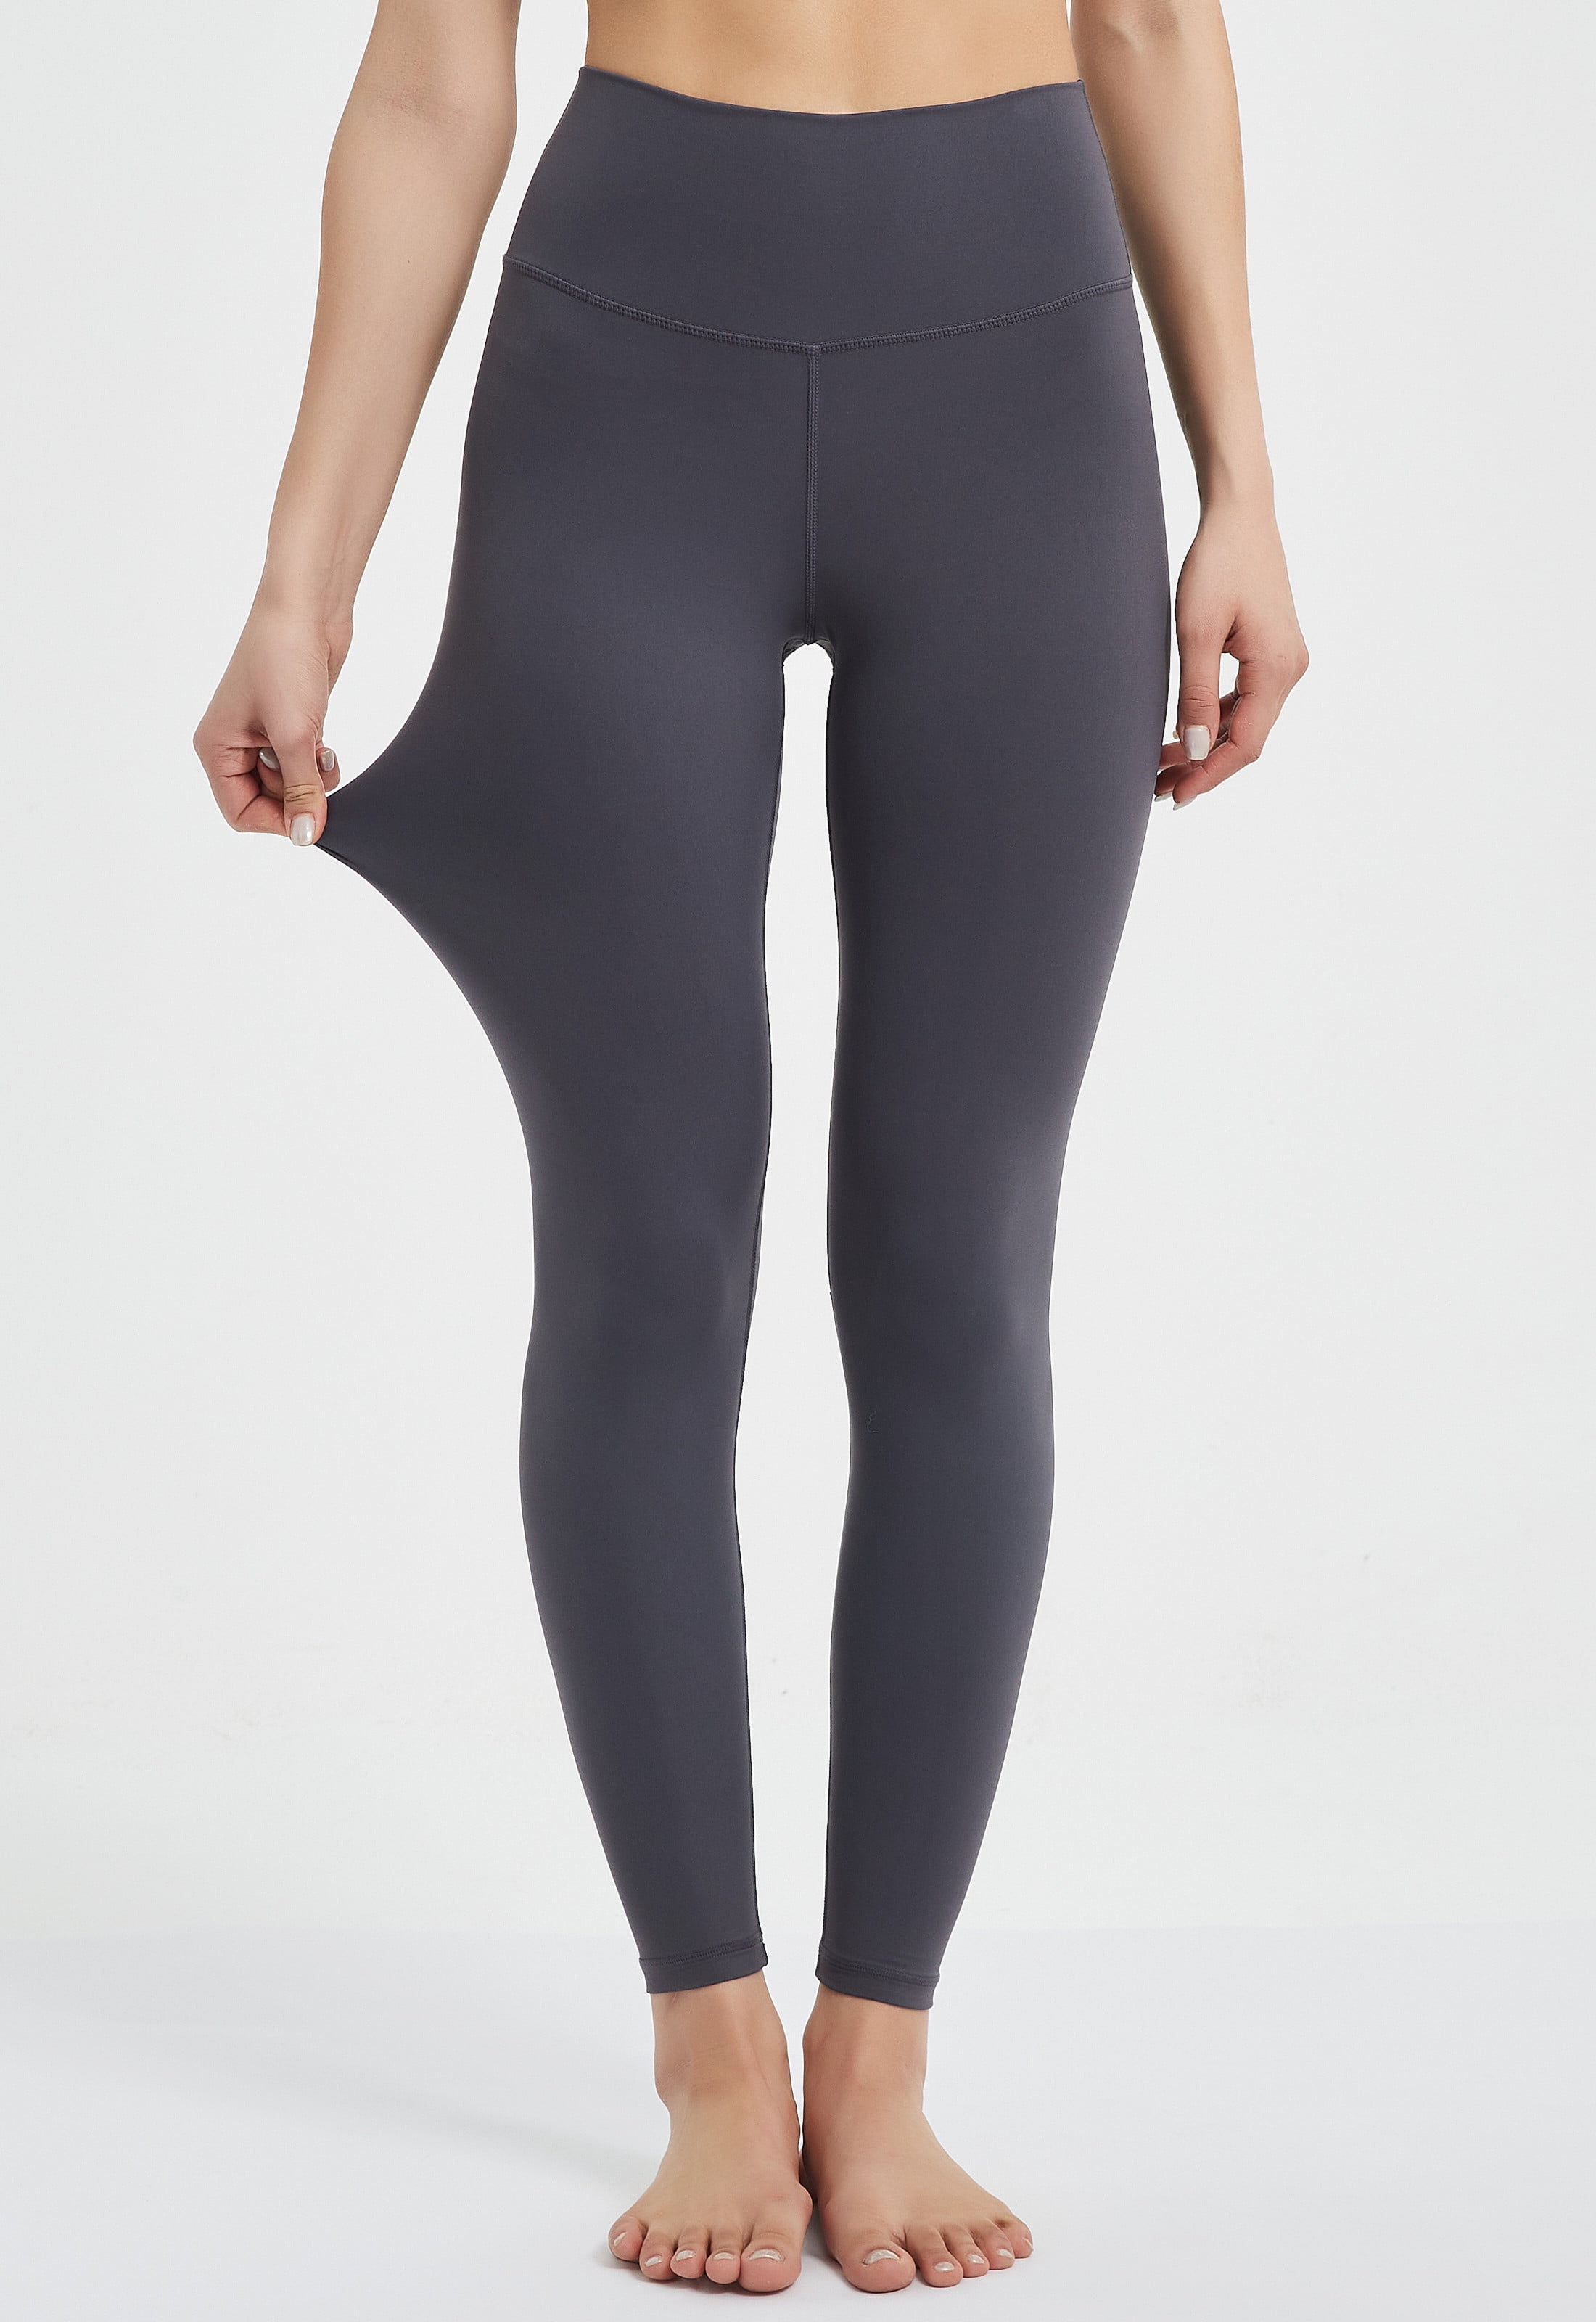 Shoppers Say These Leggings Are Totally 'Squat-Proof' — and